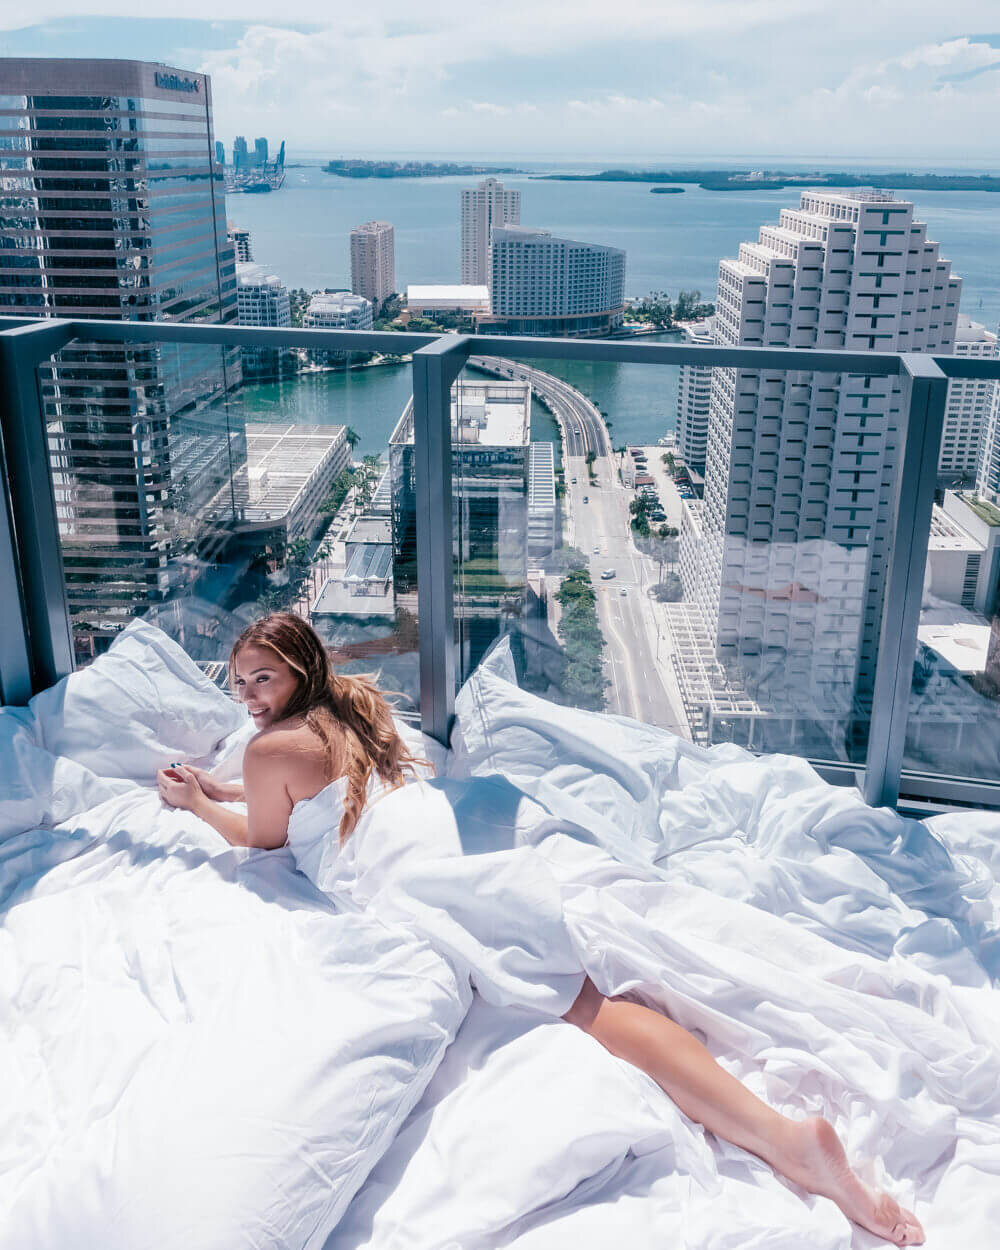 Digital content creator - Isabella laying on balcony overlooking city and ocean